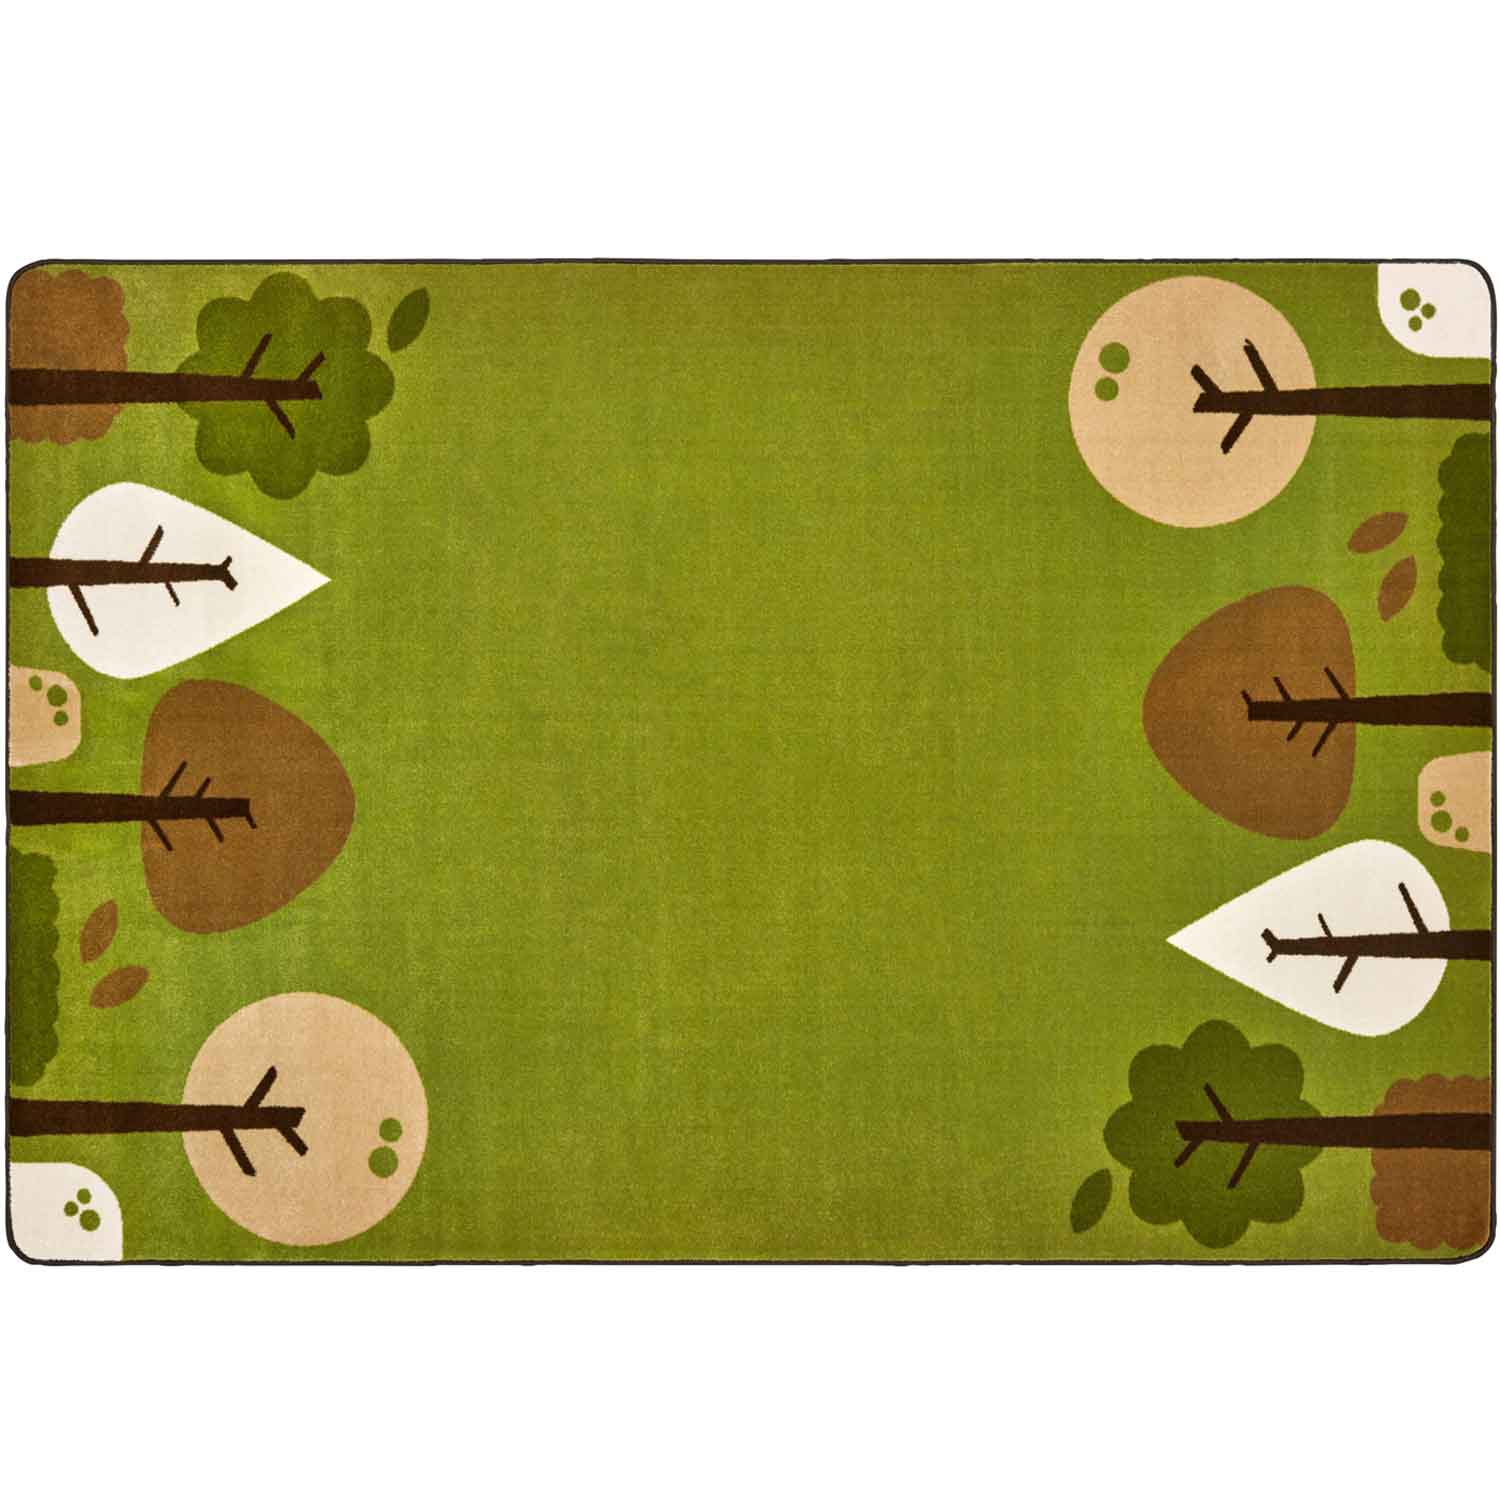 KIDSoft™ Tranquil Trees Rug, Green, Rectangle 4' x 6'